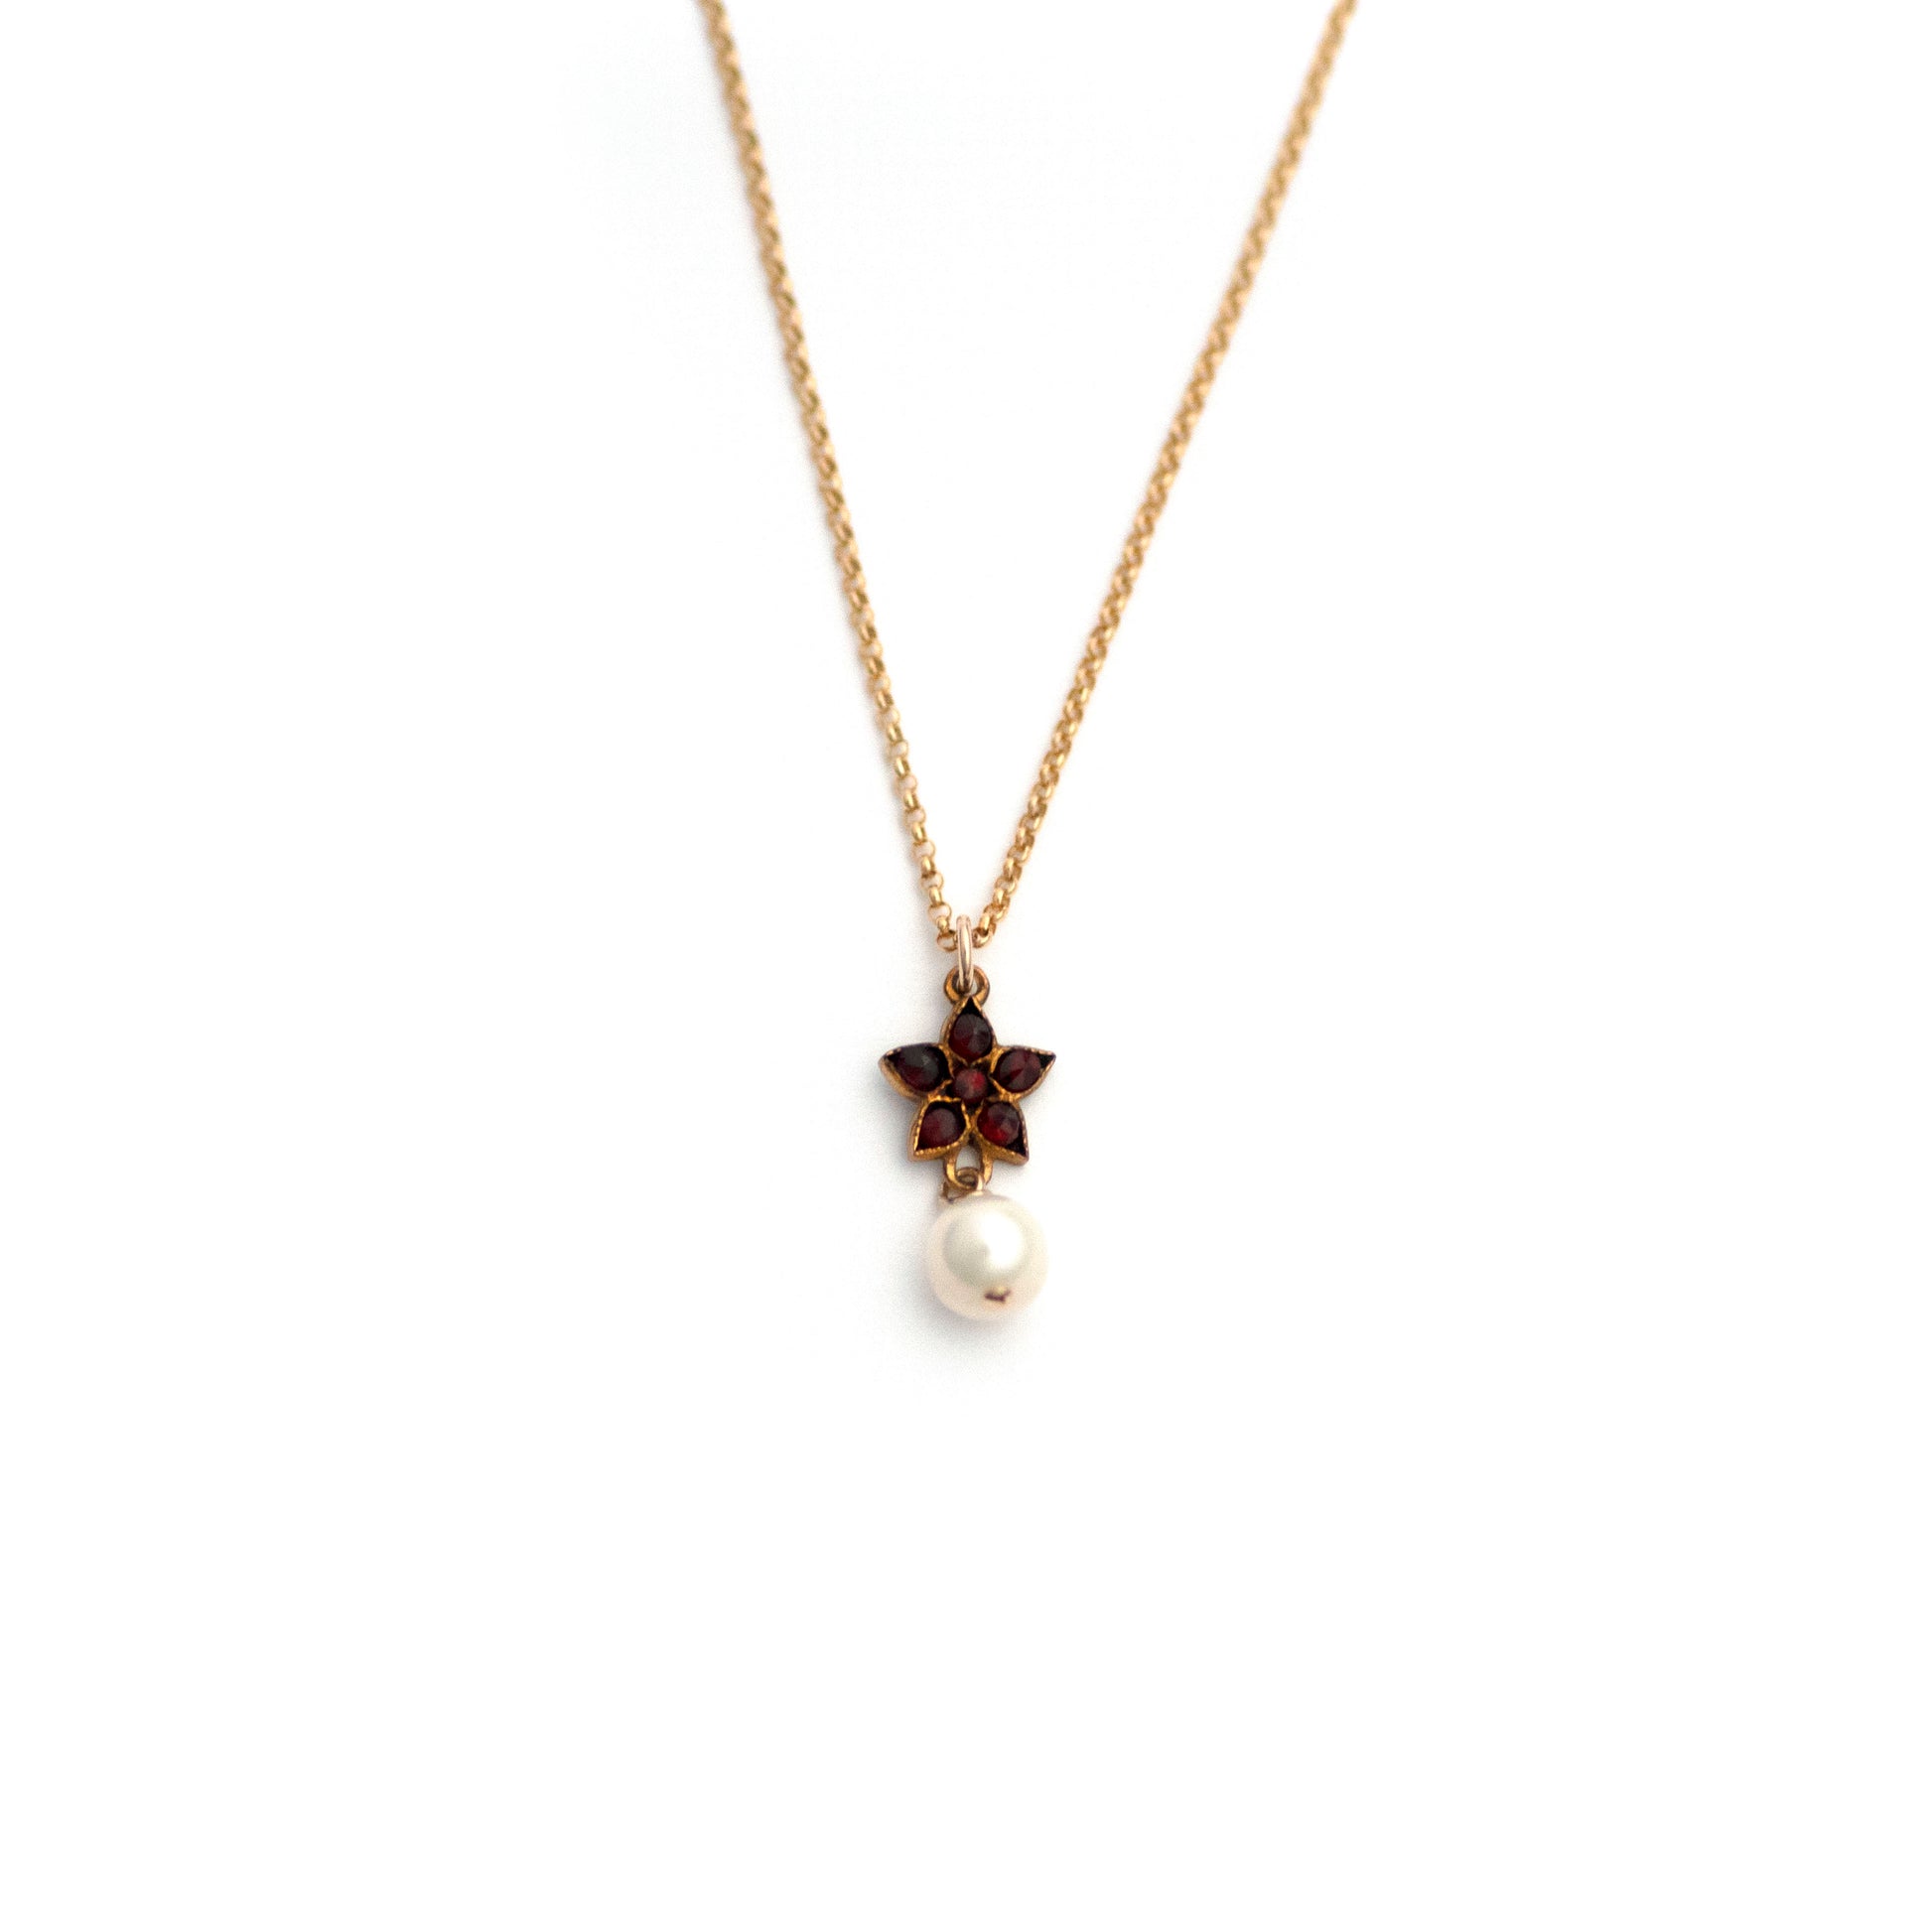 Celestial 5 Point Star Garnet and Pearl Necklace